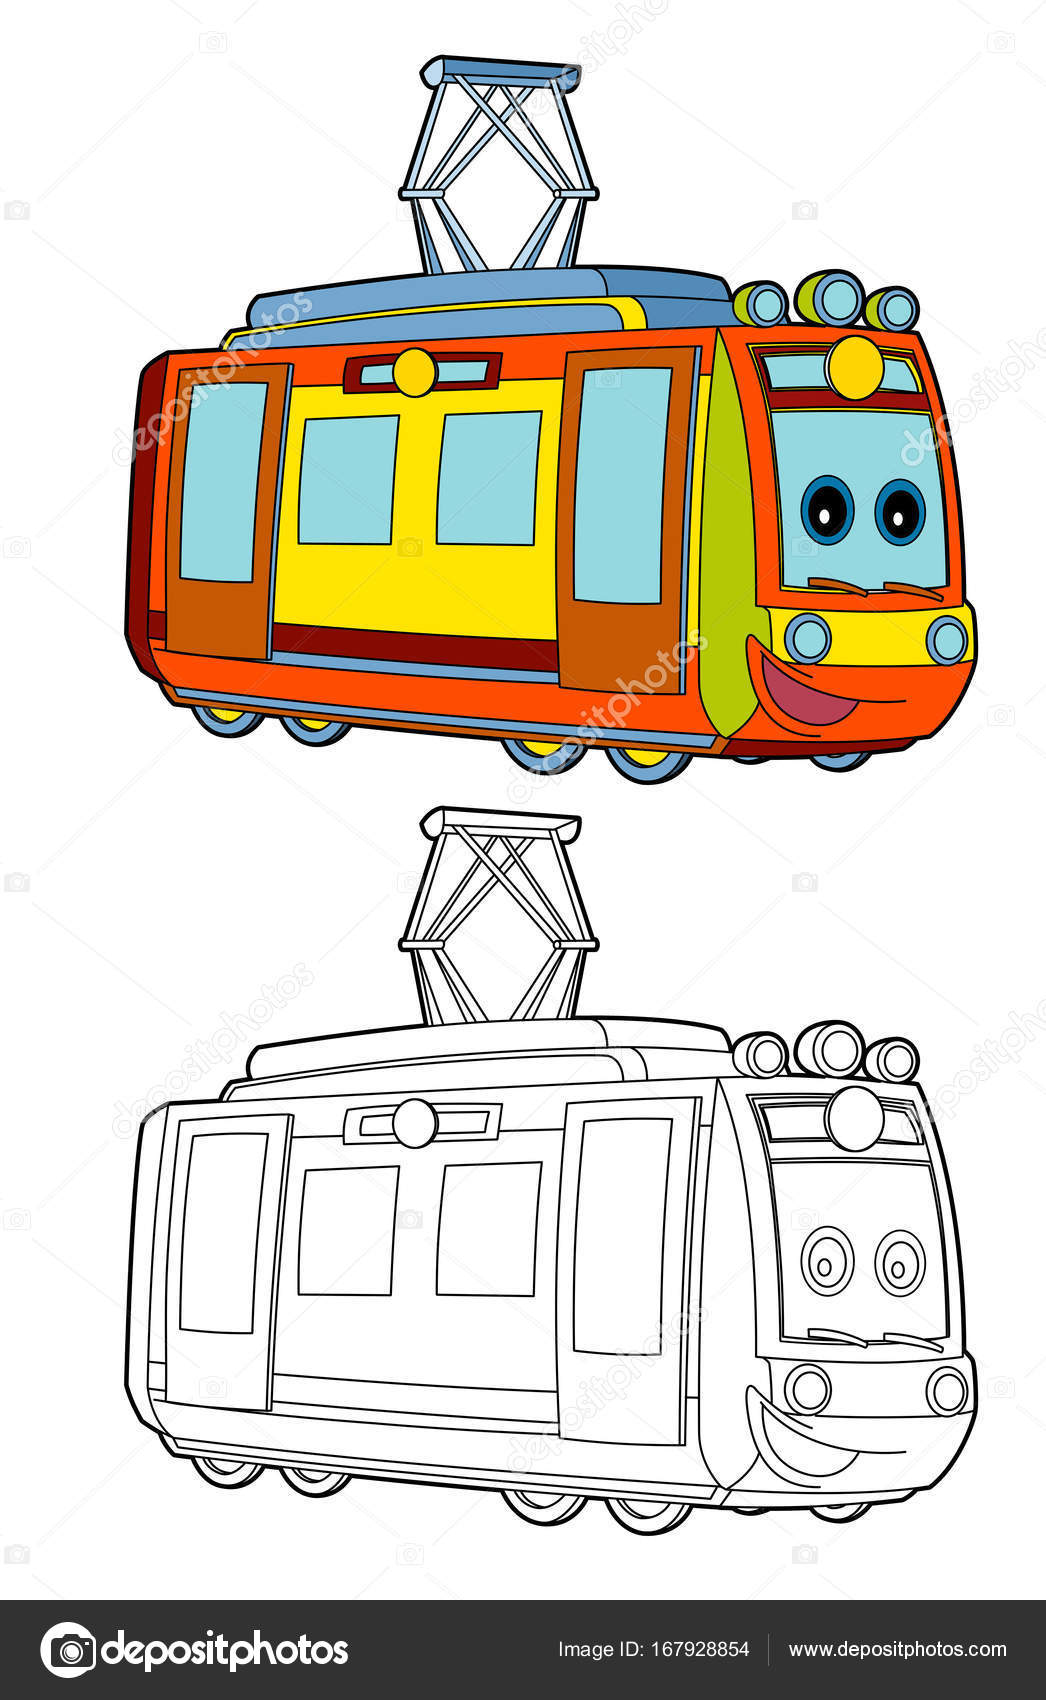 Cartoon Funny Looking Electric Train Isolated Illustration Children Stock  Photo by ©illustrator_hft 167928854